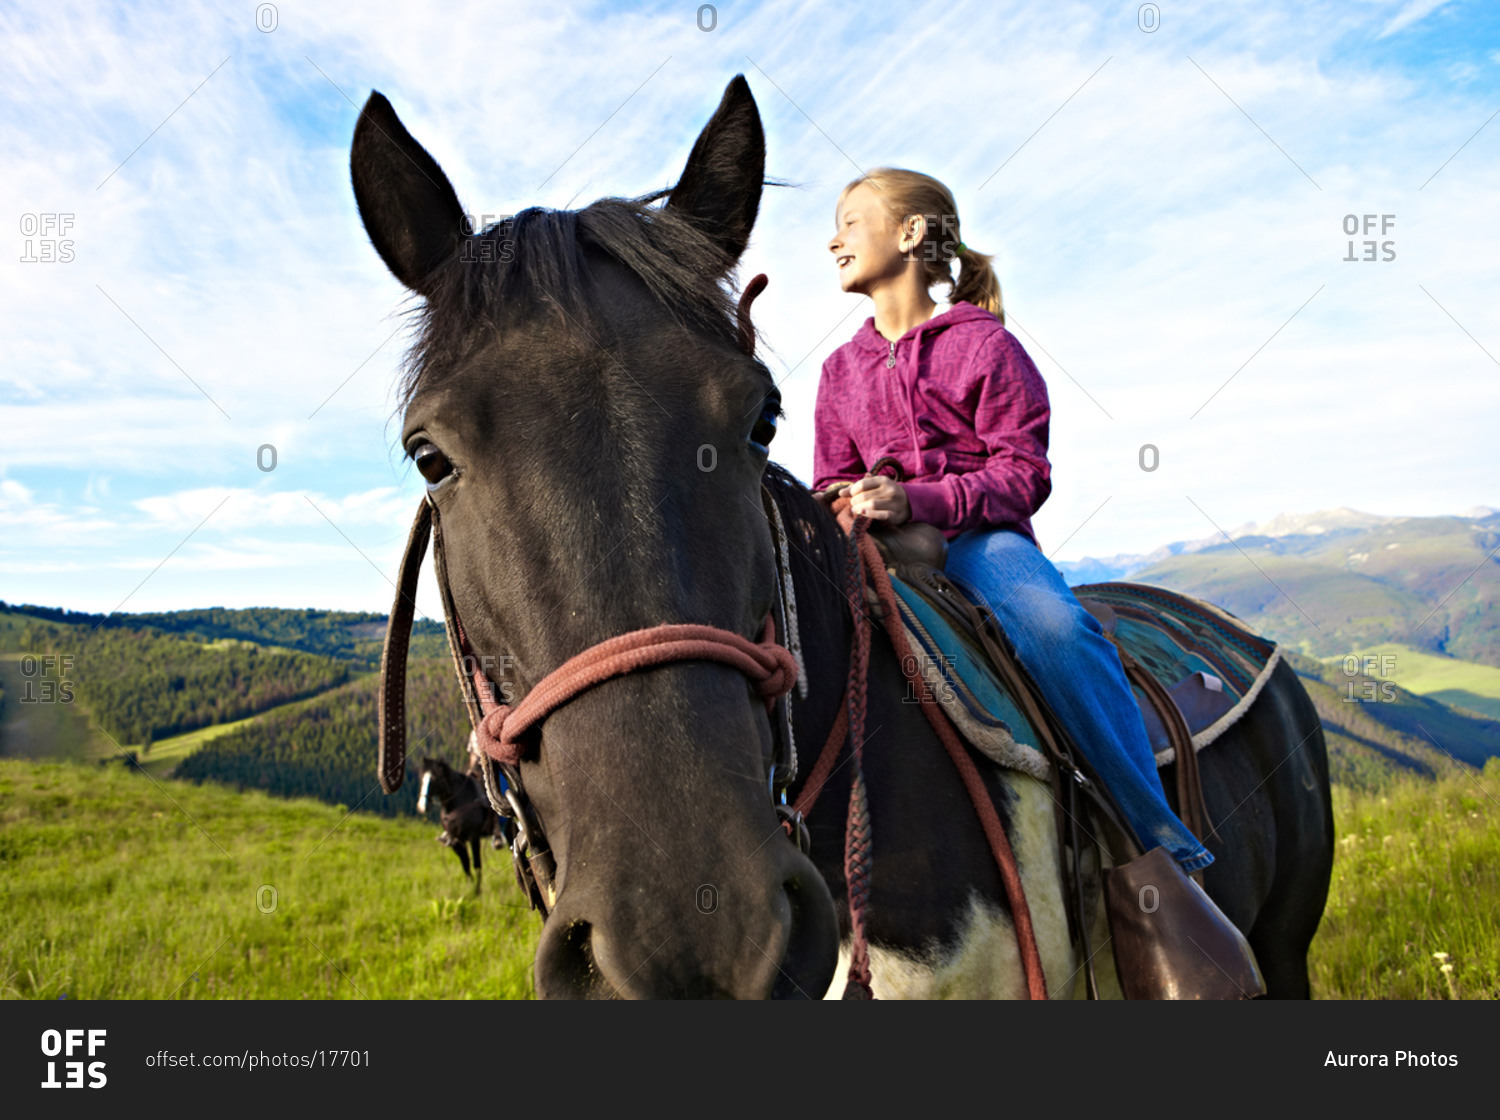 A girl sits in the saddle enjoys an early morning horseback adventure in a high alpine mountain Summer meadow.